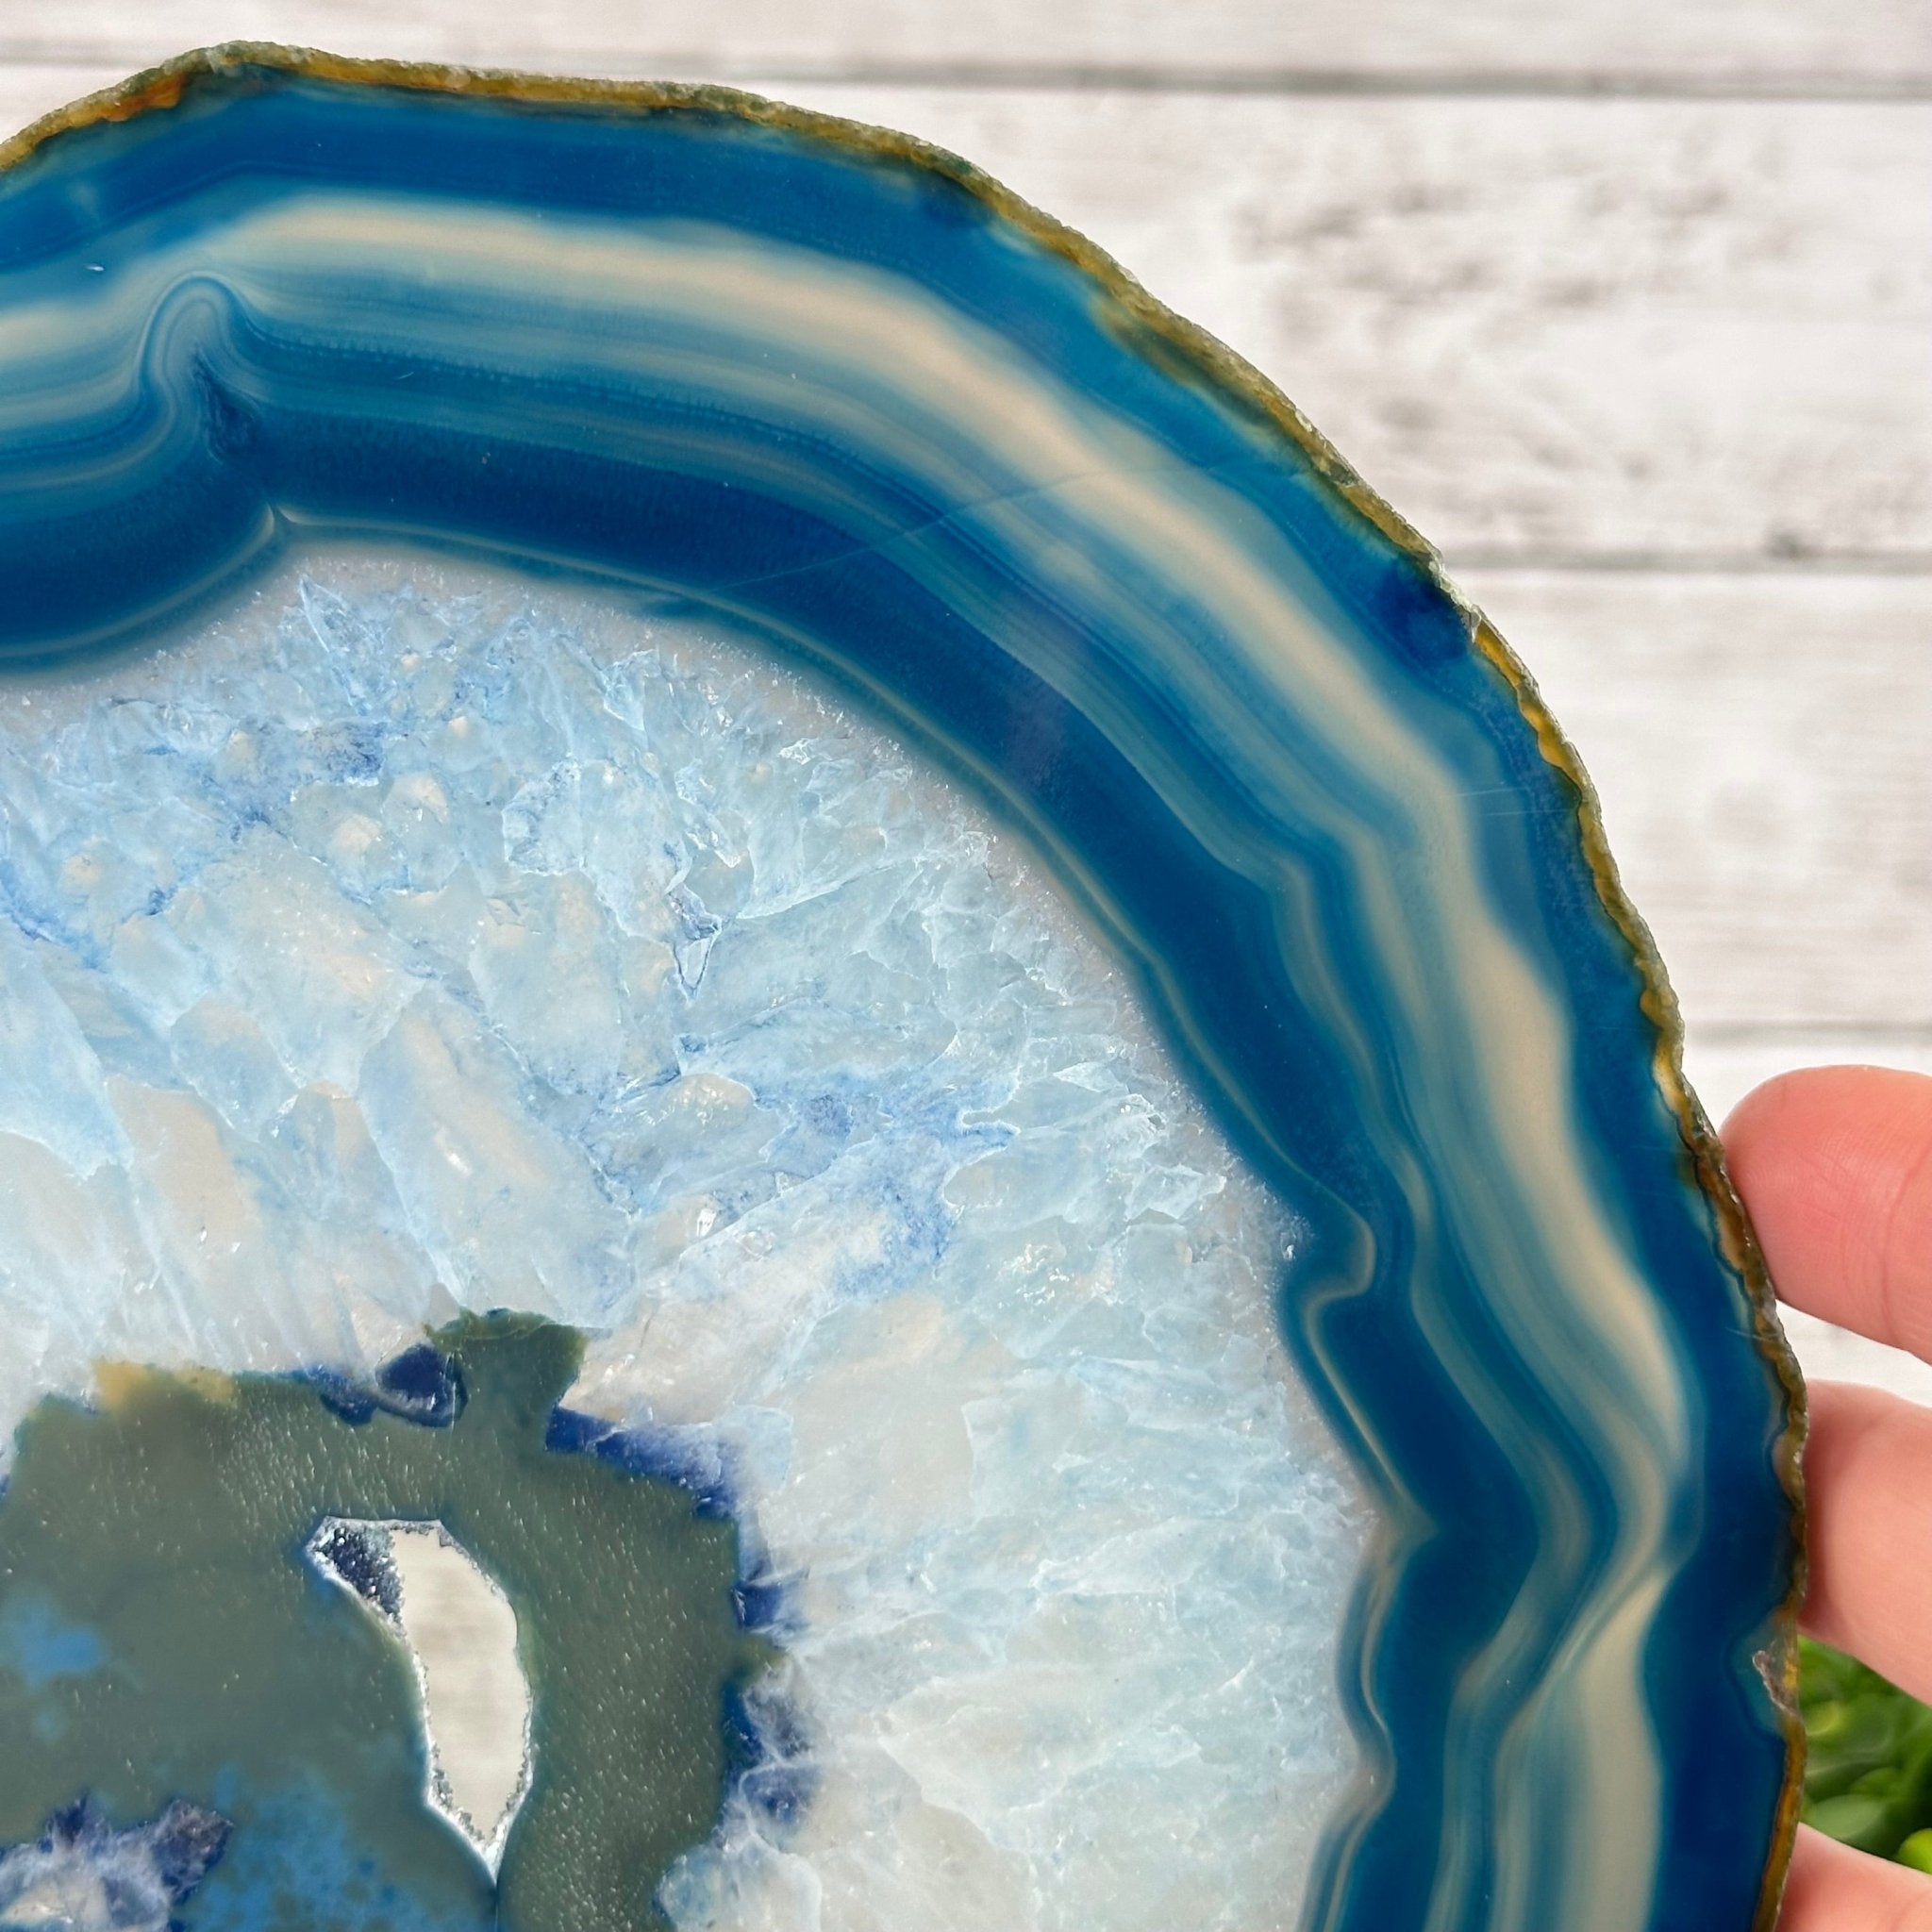 Brazilian Blue Agate Slice on a Metal Stand, 11.6" Tall #5055-0135 - Brazil GemsBrazil GemsBrazilian Blue Agate Slice on a Metal Stand, 11.6" Tall #5055-0135Slices on Fixed Bases5055-0135